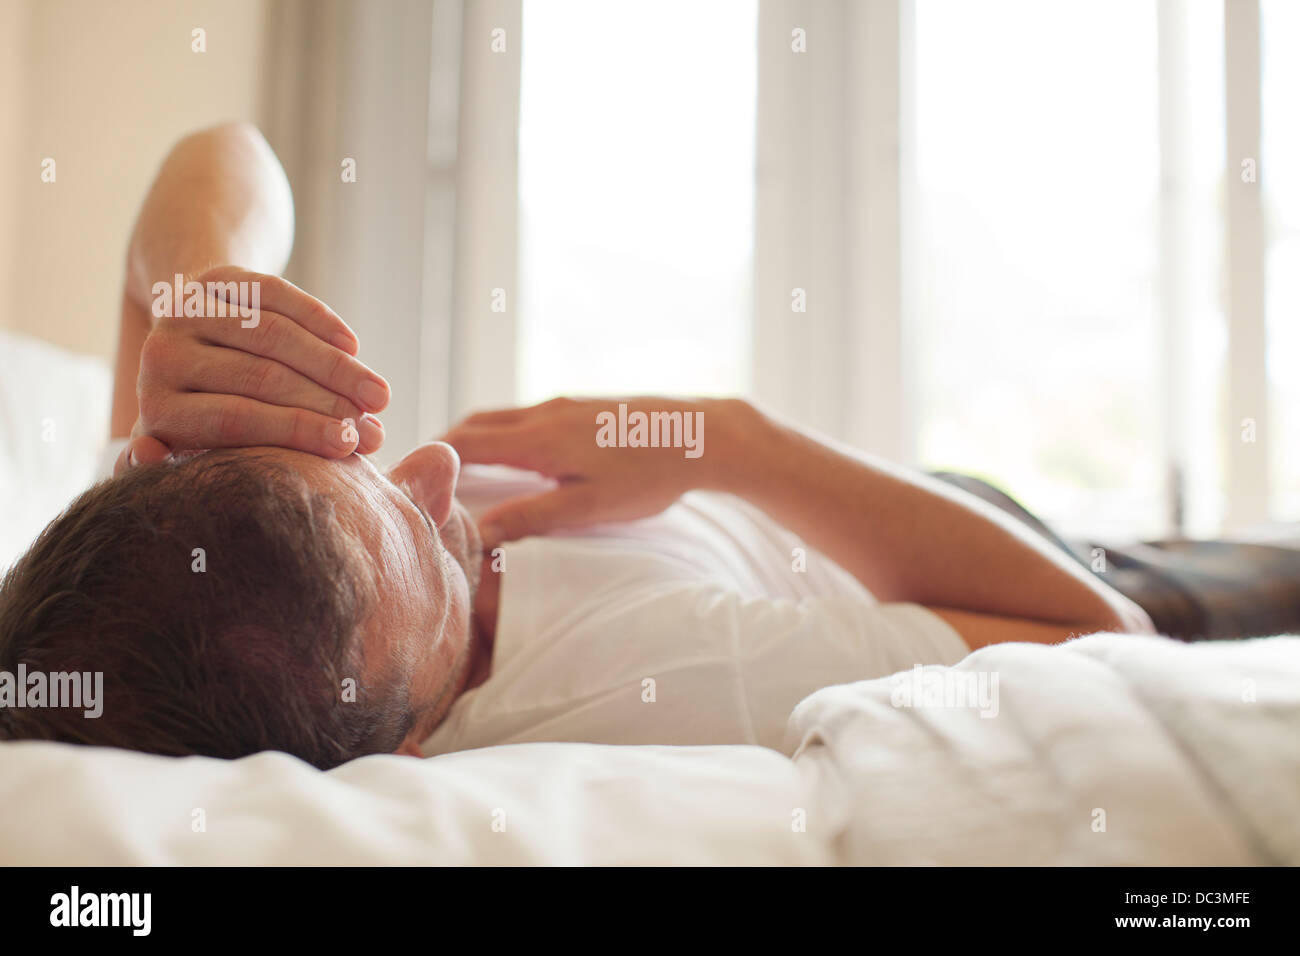 Man laying in bed with head in hands Stock Photo